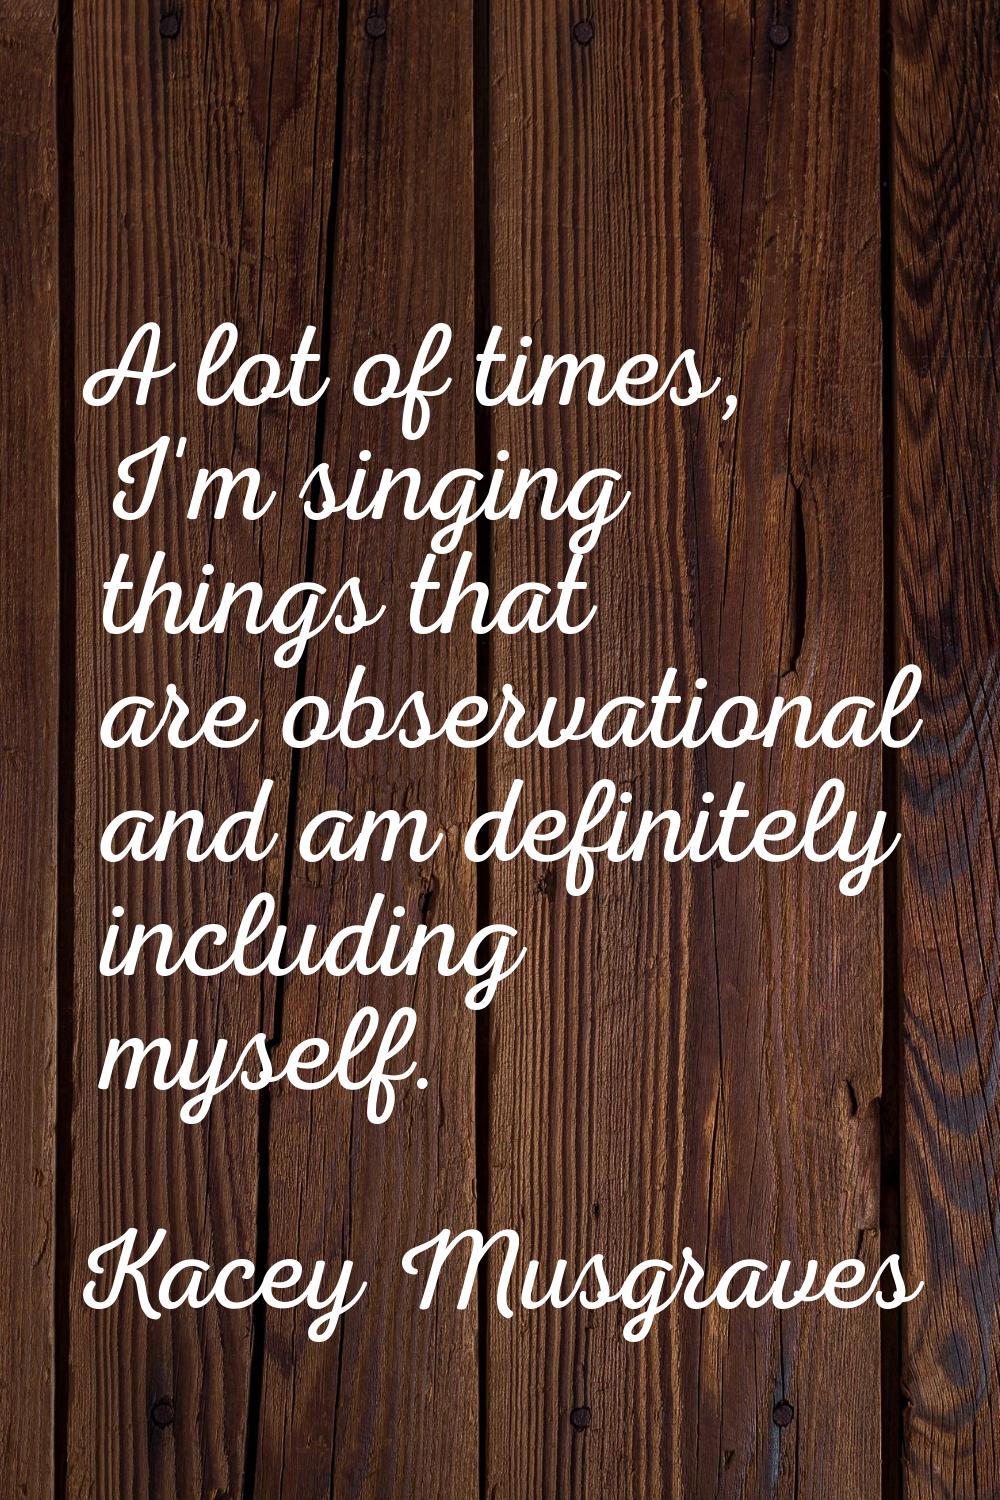 A lot of times, I'm singing things that are observational and am definitely including myself.